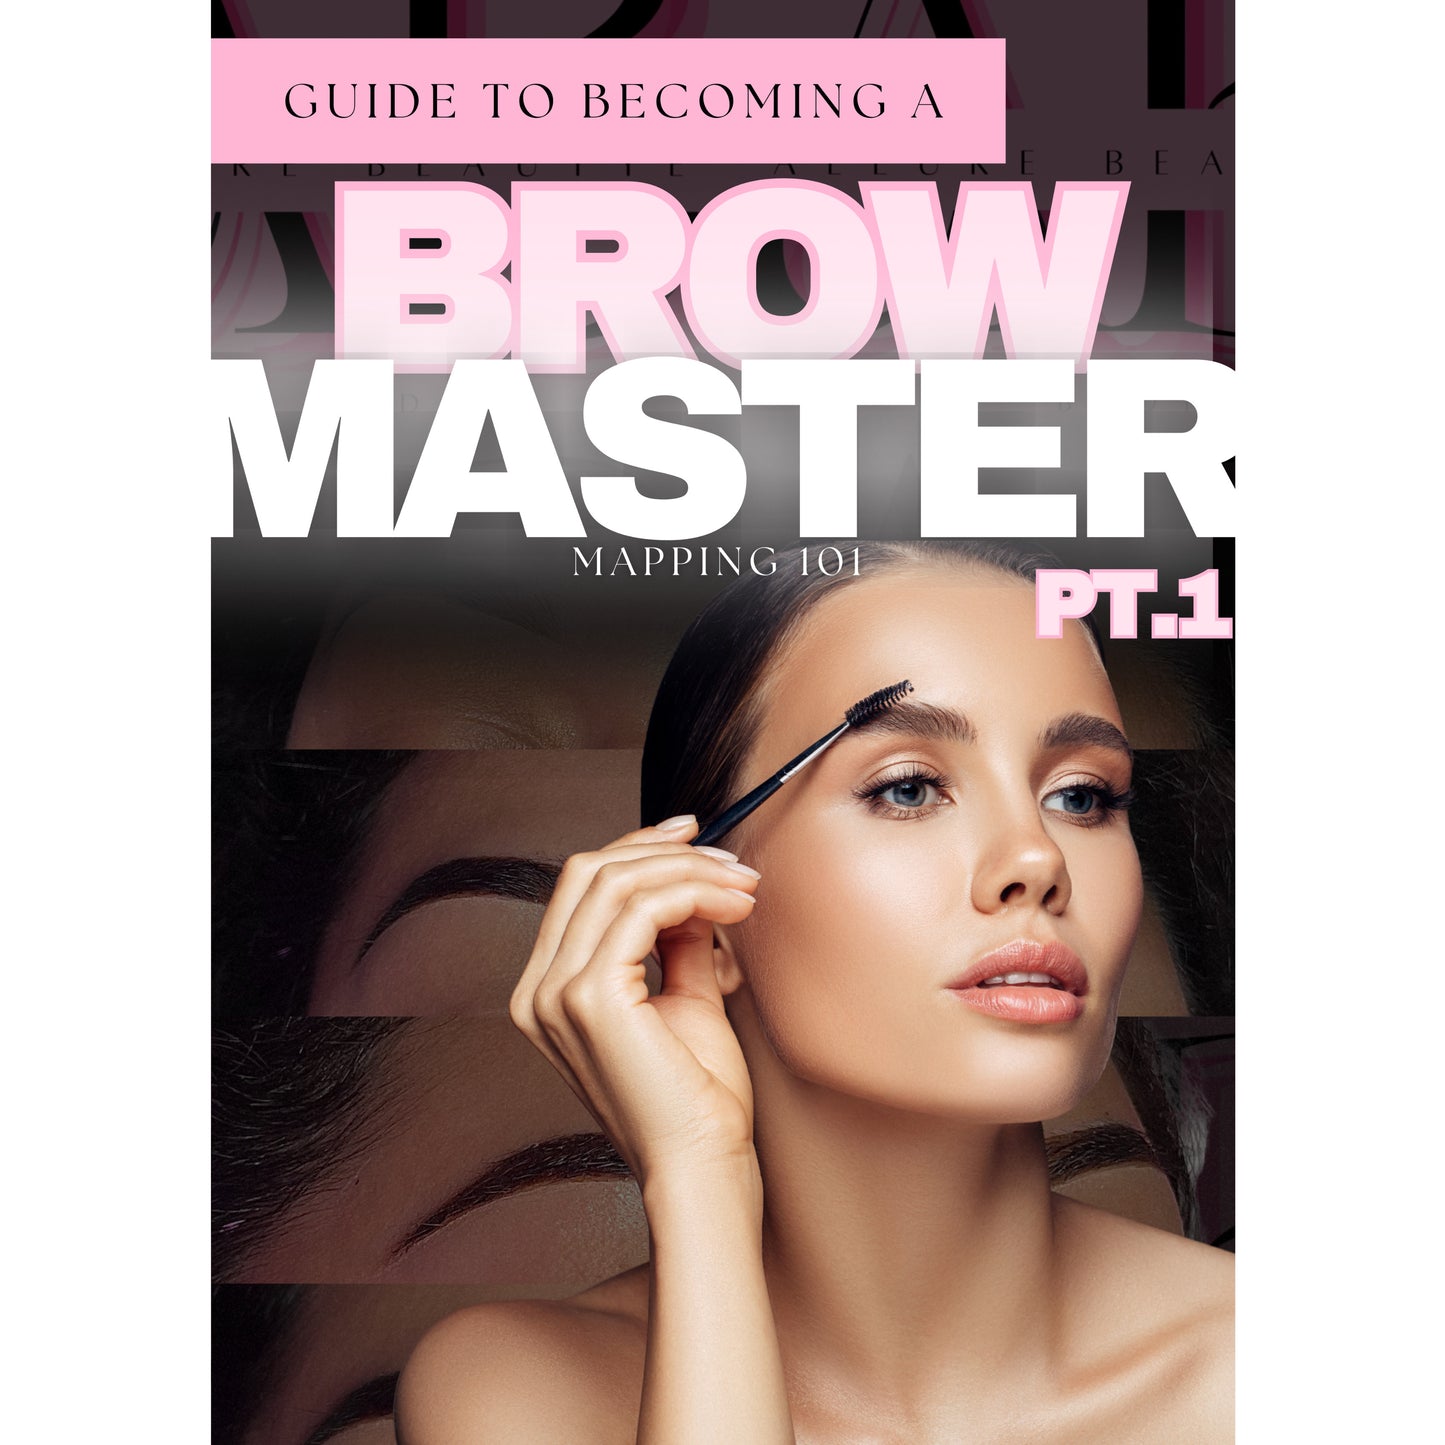 Brow Master: Mapping 101 Ebook